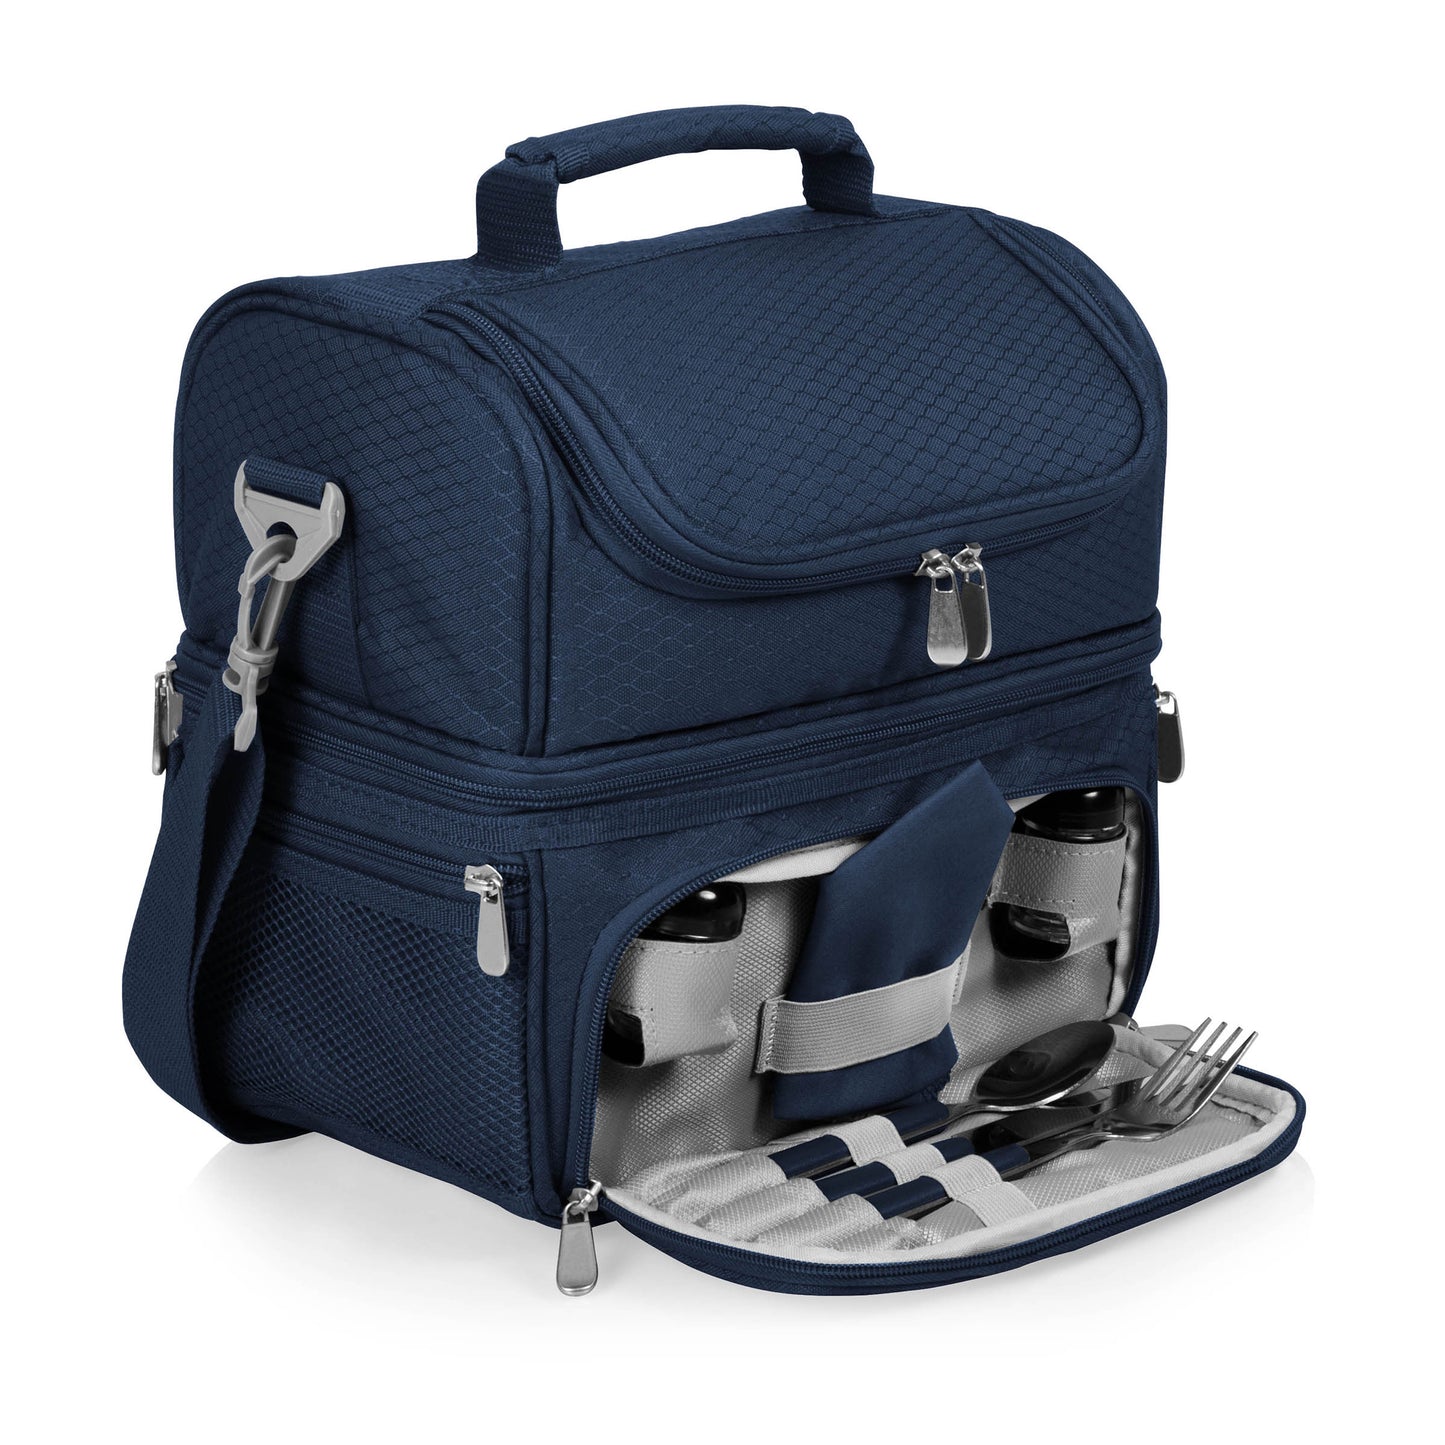 Chicago Bears - Pranzo Lunch Cooler Bag